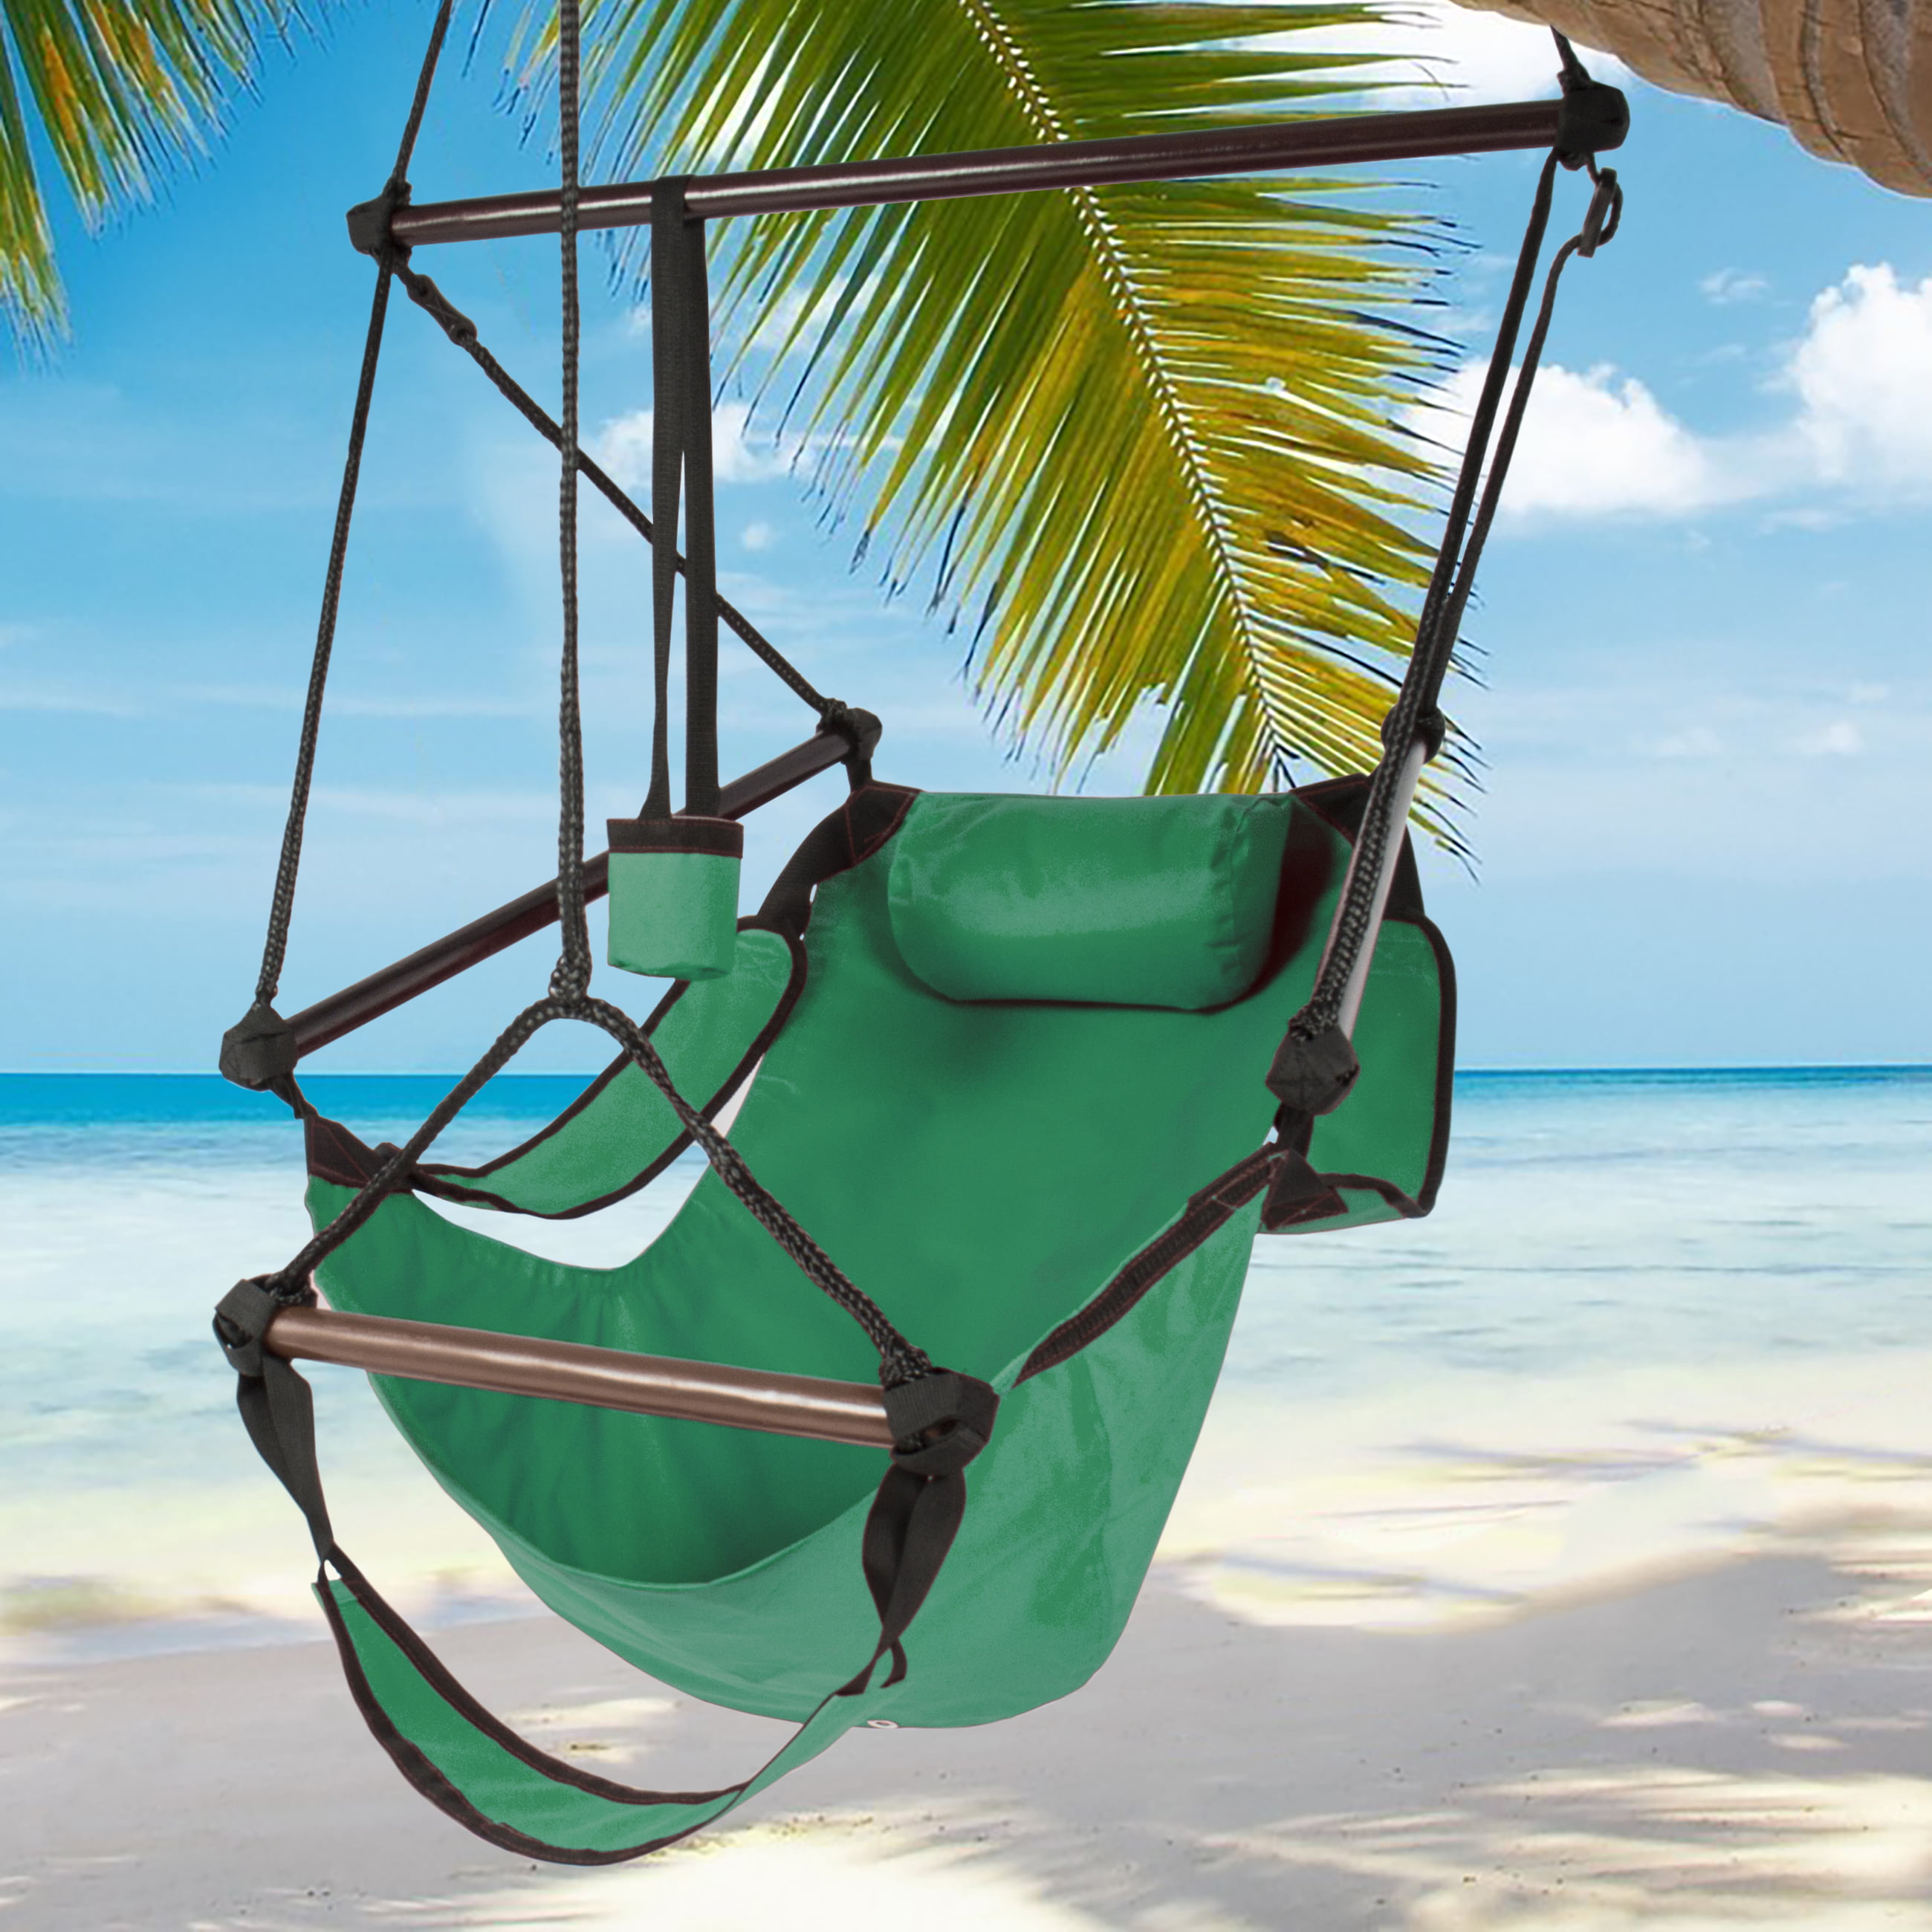 Best Choice Products Hammock Hanging Chair Air Deluxe Sky